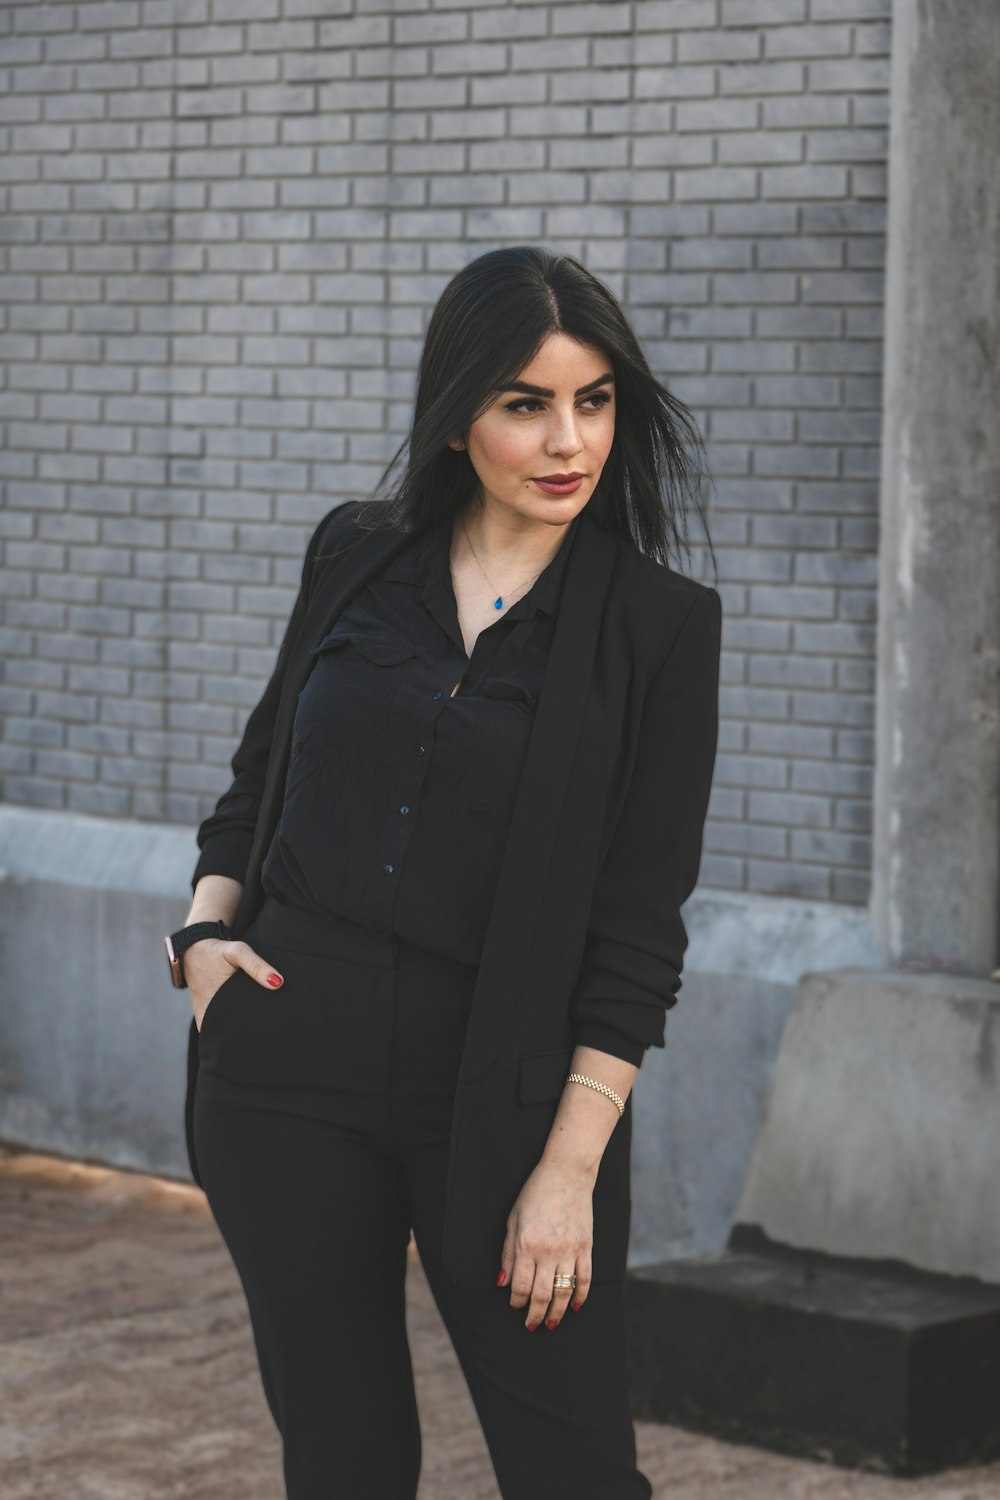 a woman in a black shirt and black pants